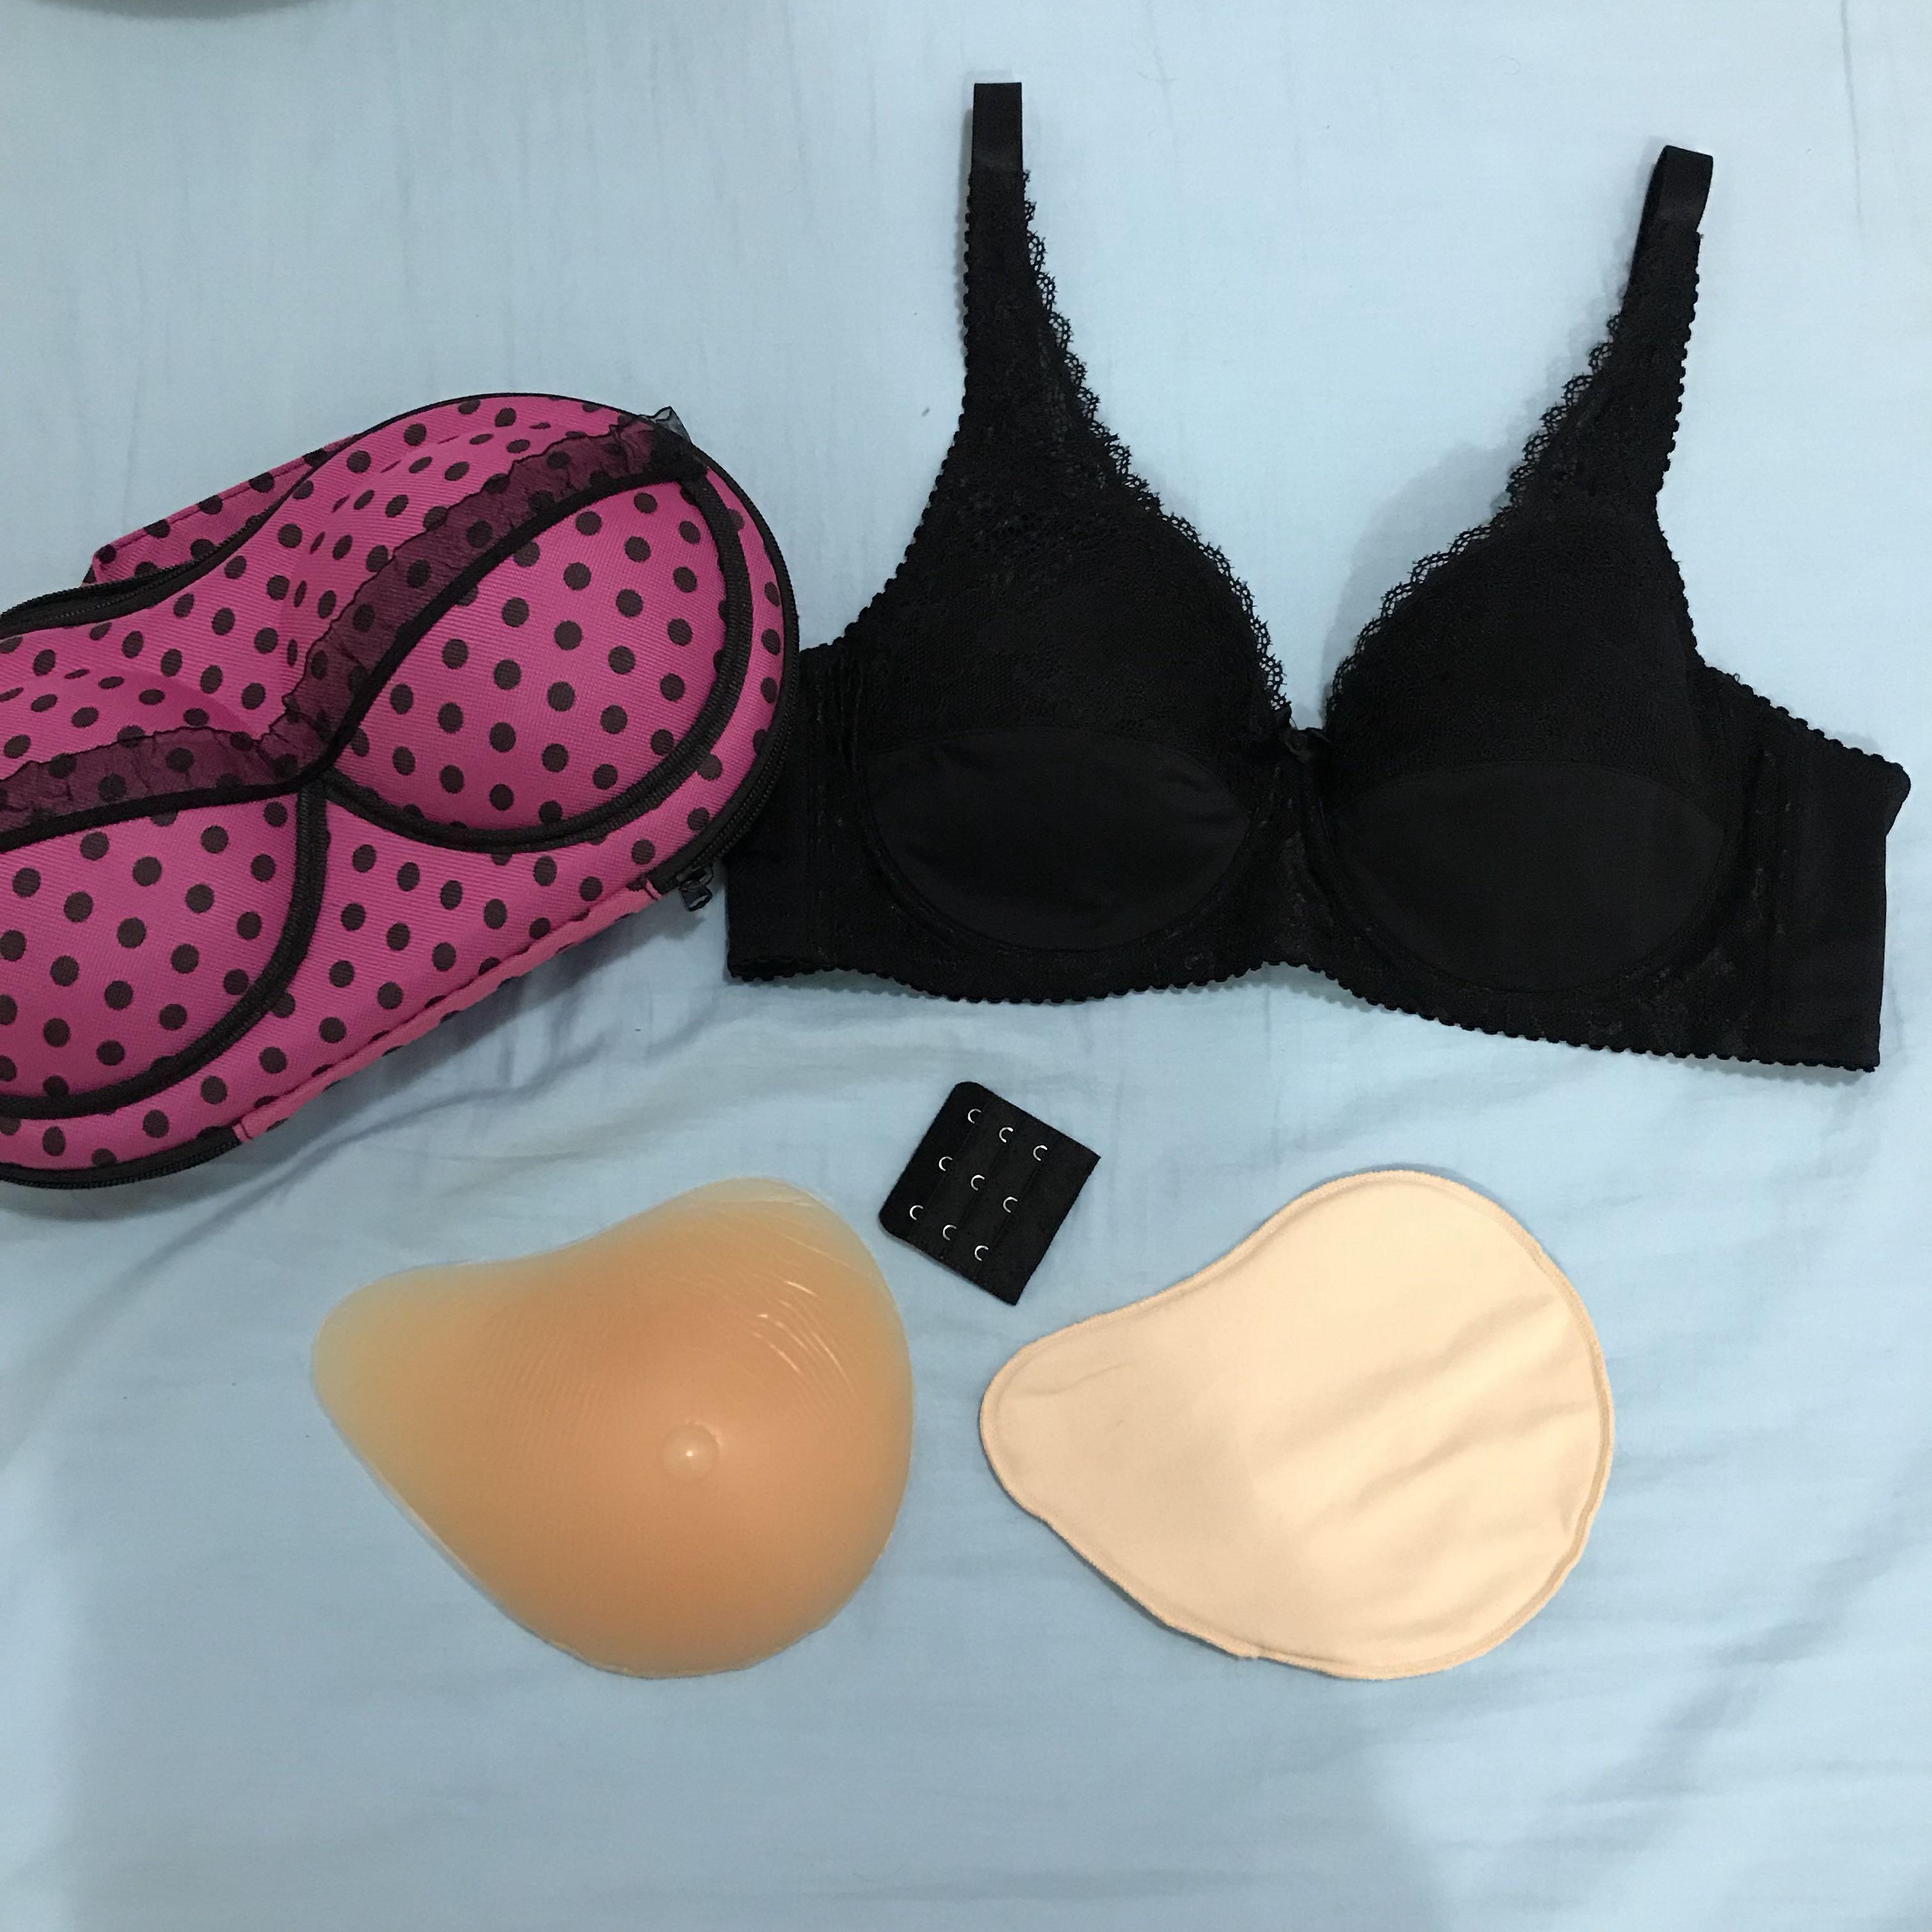 https://media.karousell.com/media/photos/products/2018/09/09/preorder_prosthesis_silicone_breast_form_with_mastectomy_bra_super_value_set_free_cover_bust_cup_bre_1536478633_ba7b23b6_progressive.jpg